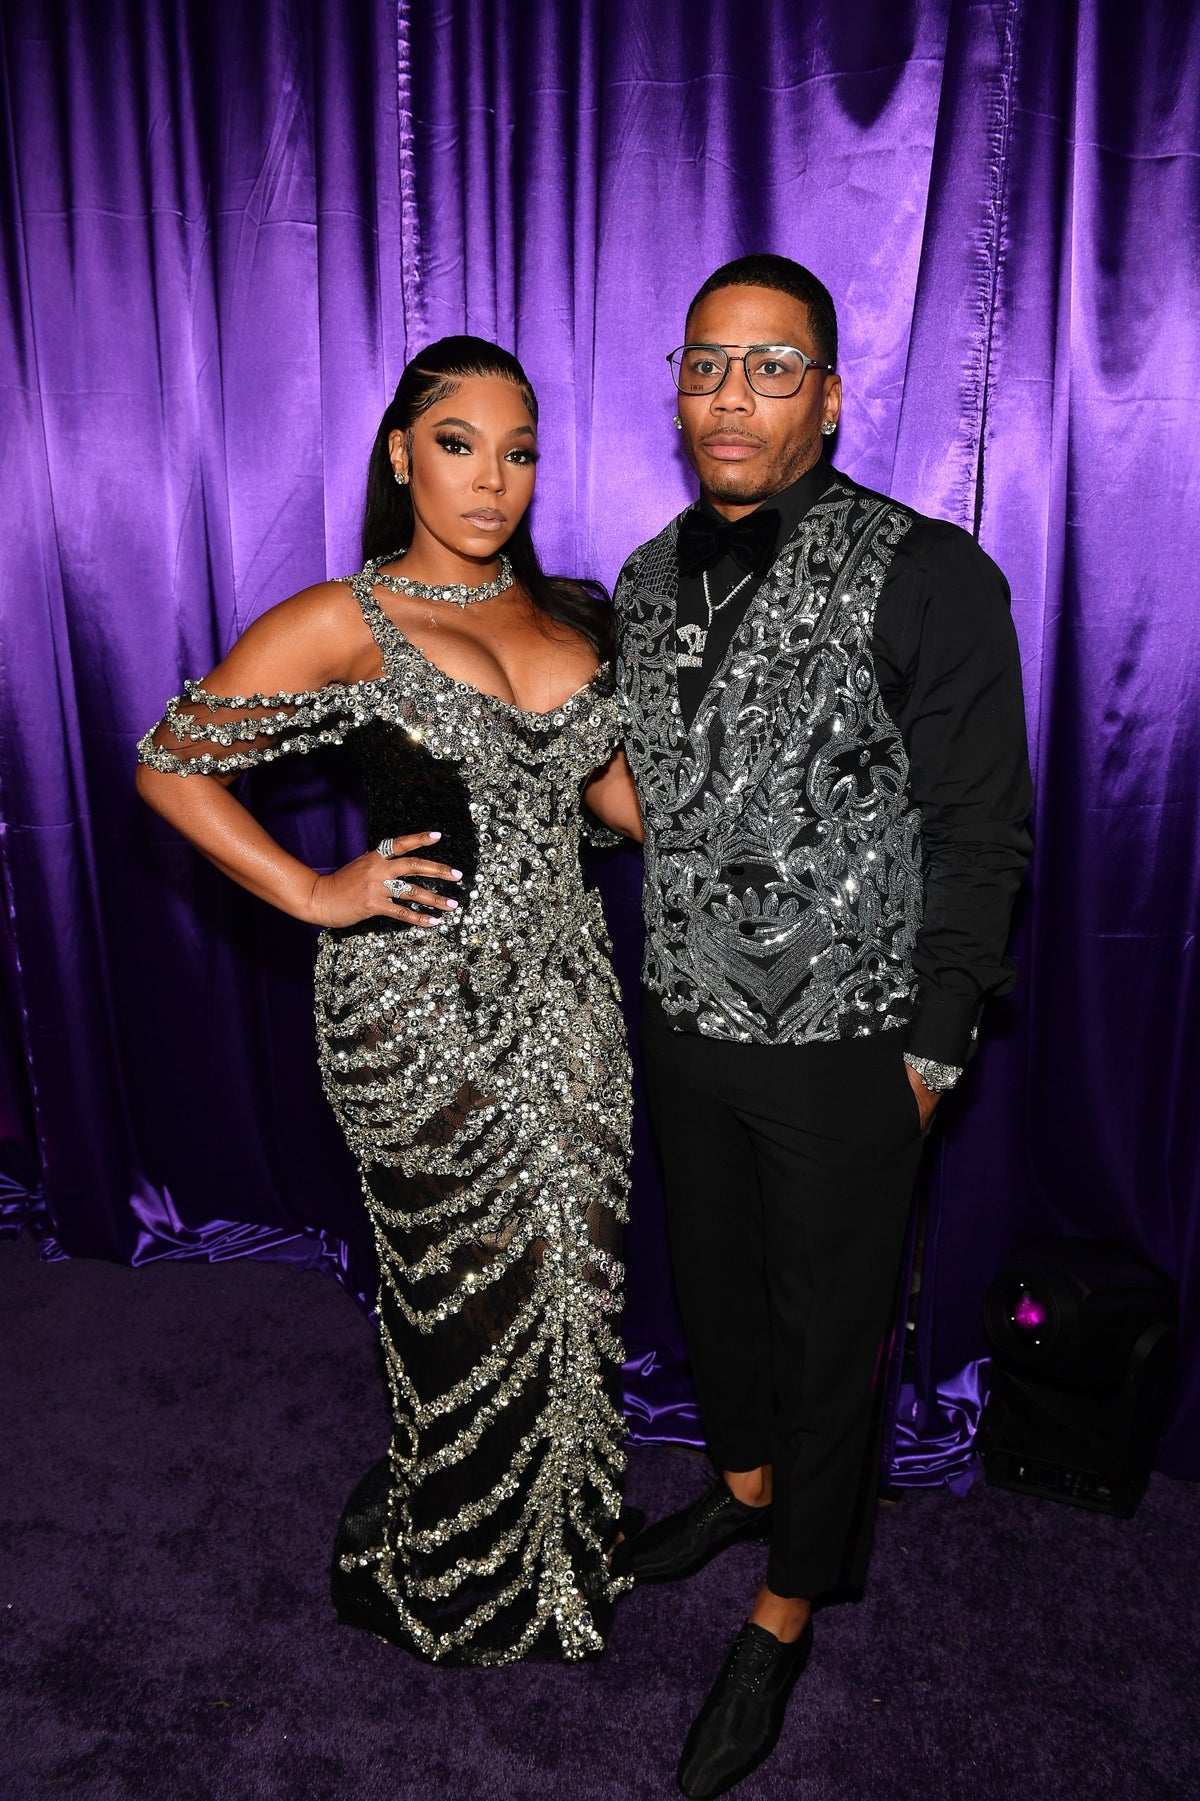 A Reunited Ashanti And Nelly Step Out For Date Night At StarStudded